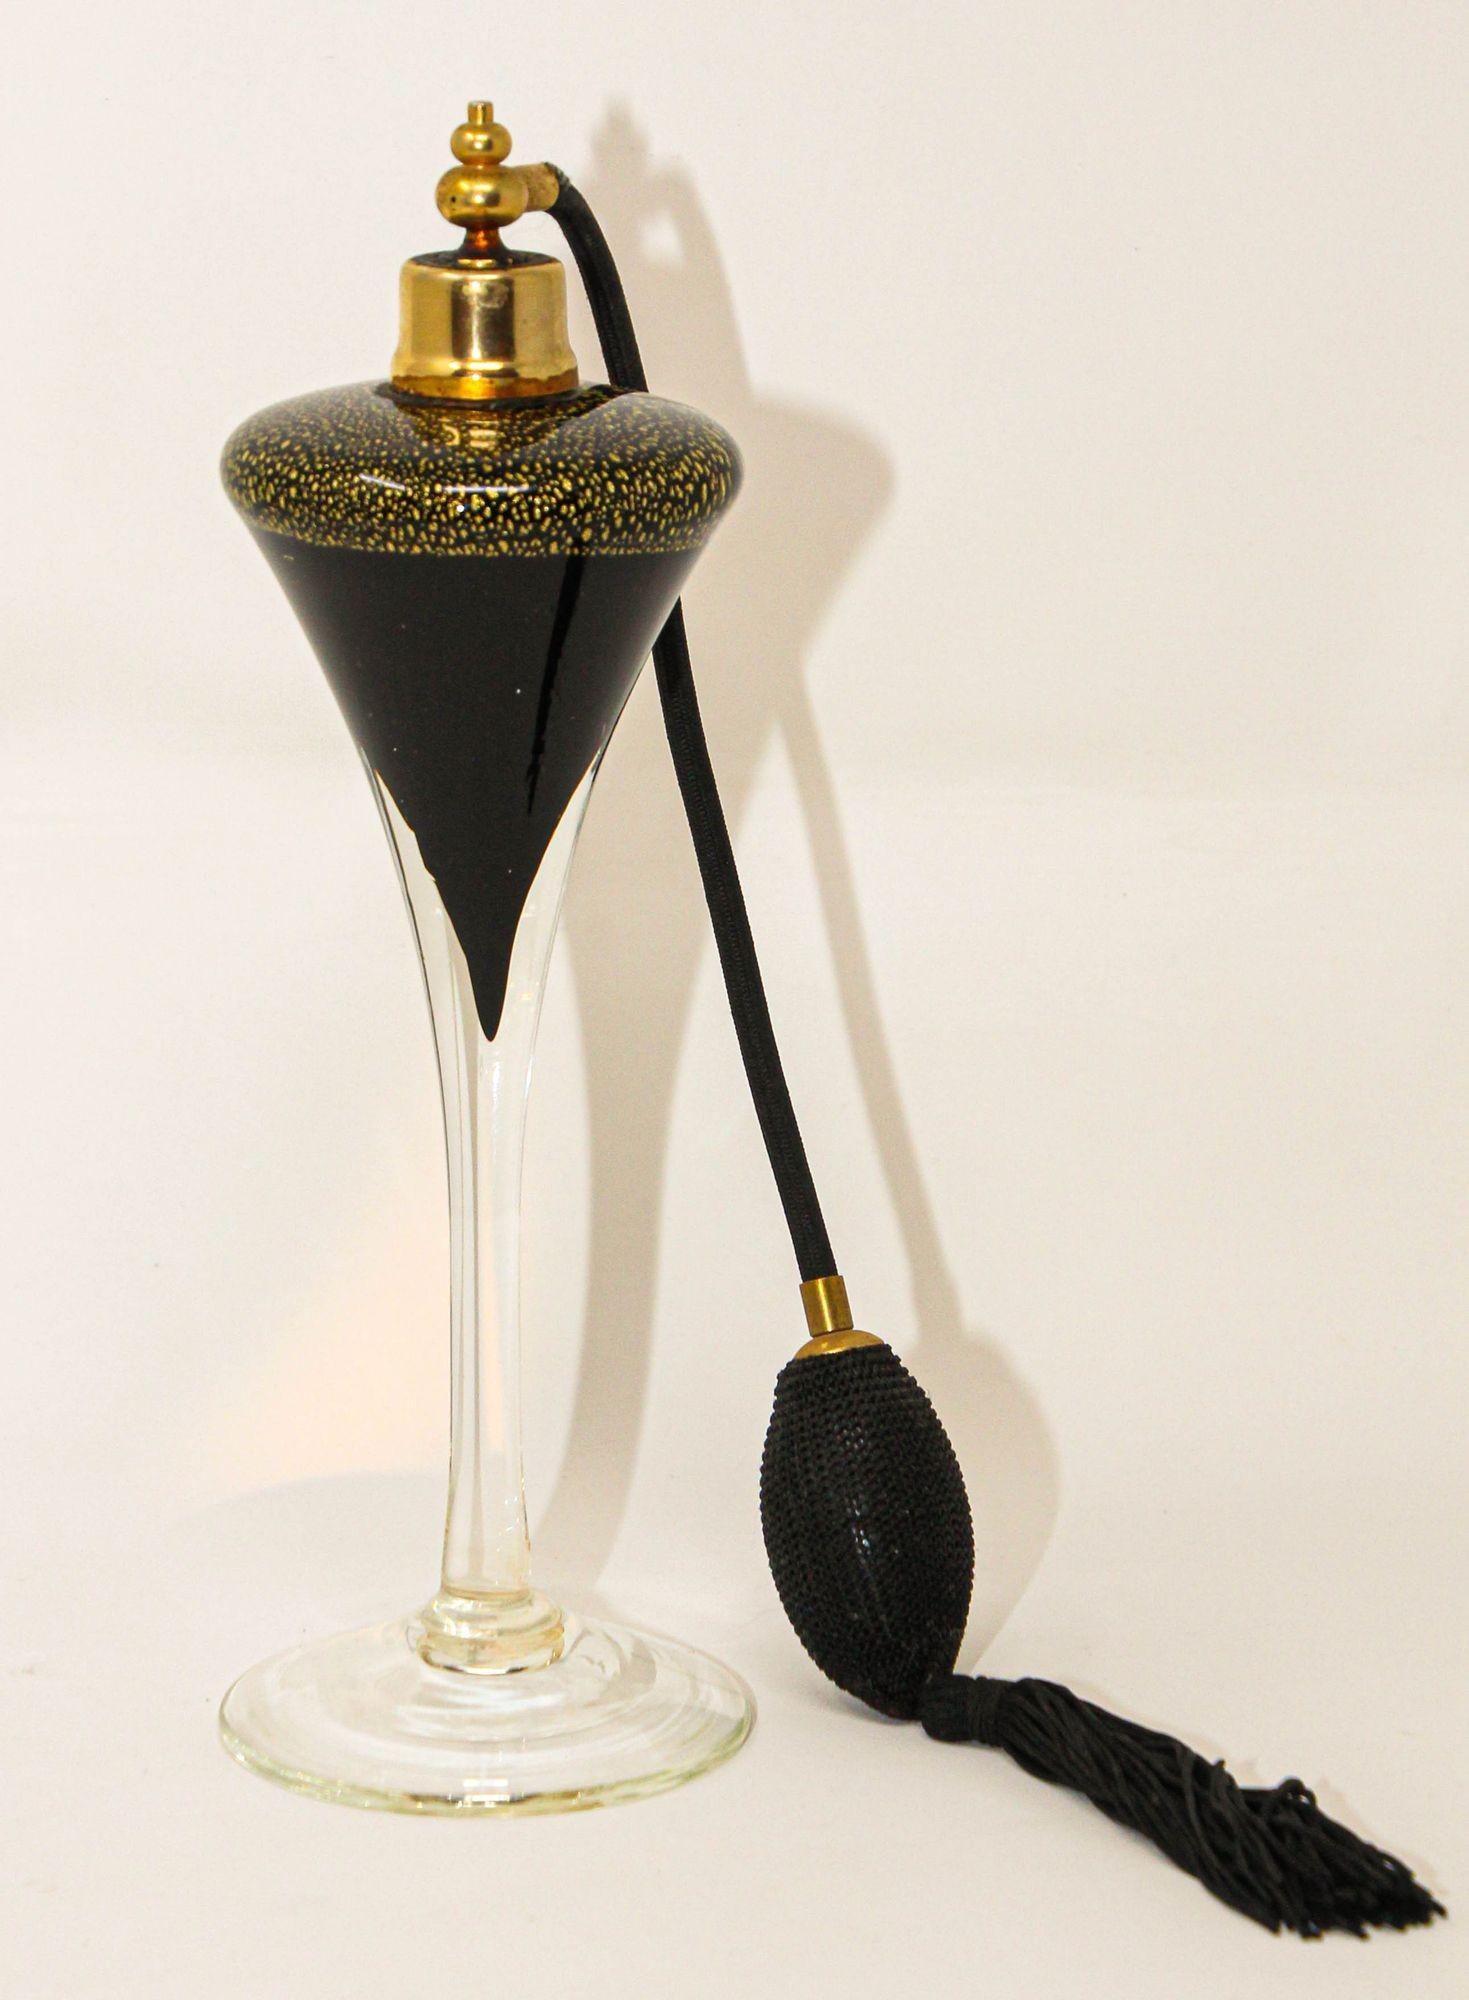 Vintage Art Deco style Archimede Seguso tall black and gold aventurine perfume bottle with black silk atomizer.
Italian Murano art glass perfume bottle black glass with sparkling gold aventurine and clear long fluted tulip glass shape. 
This piece